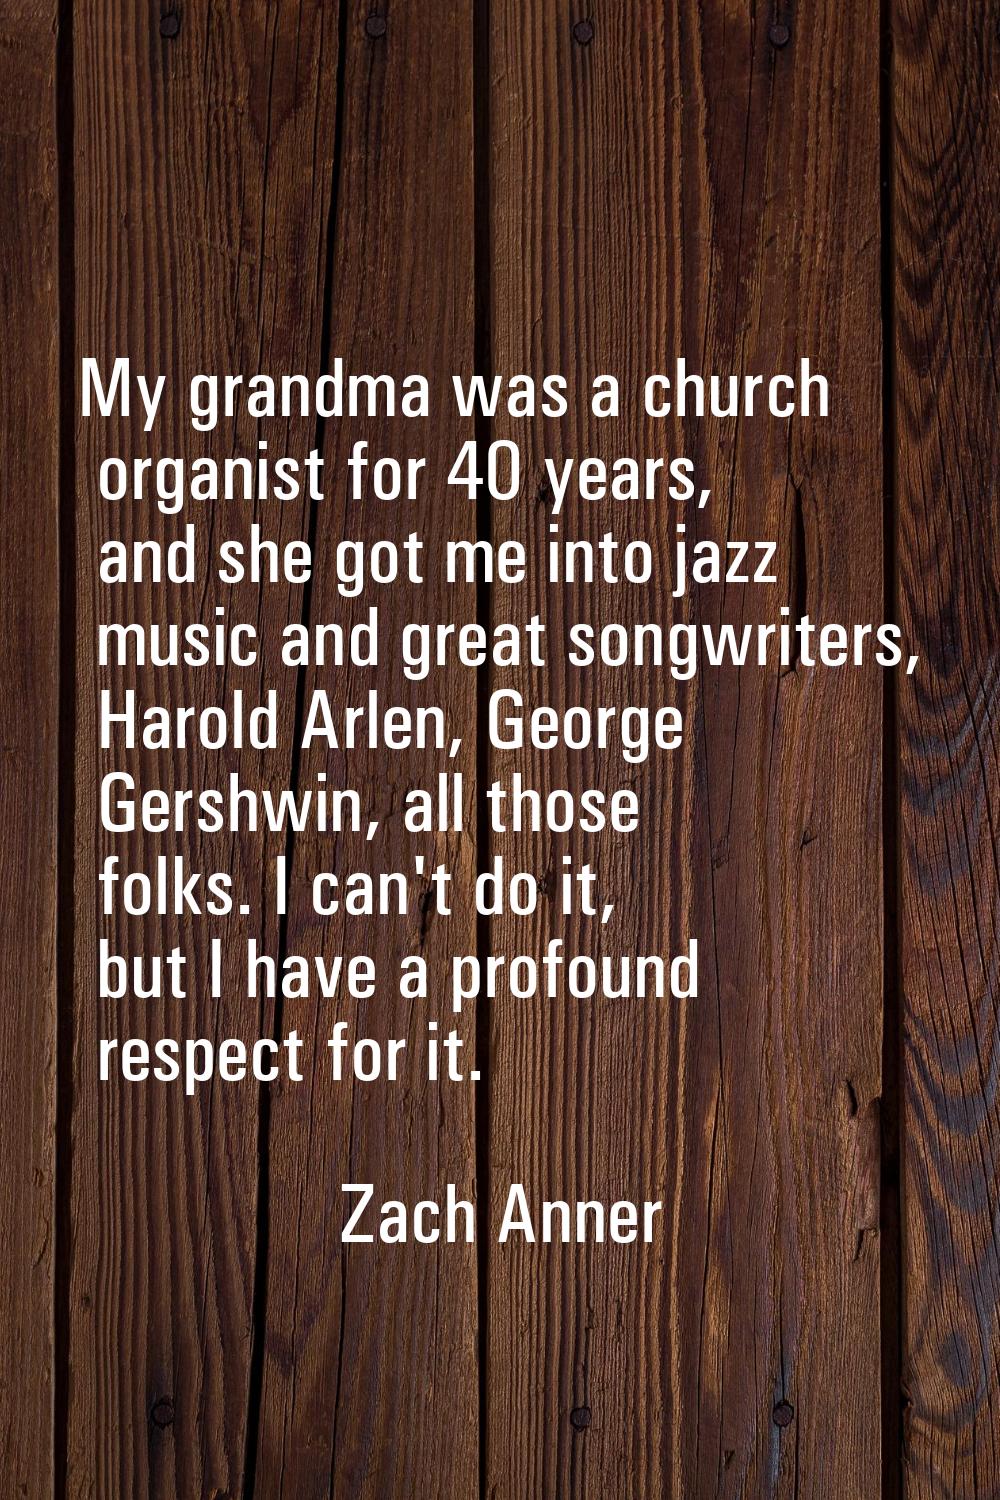 My grandma was a church organist for 40 years, and she got me into jazz music and great songwriters